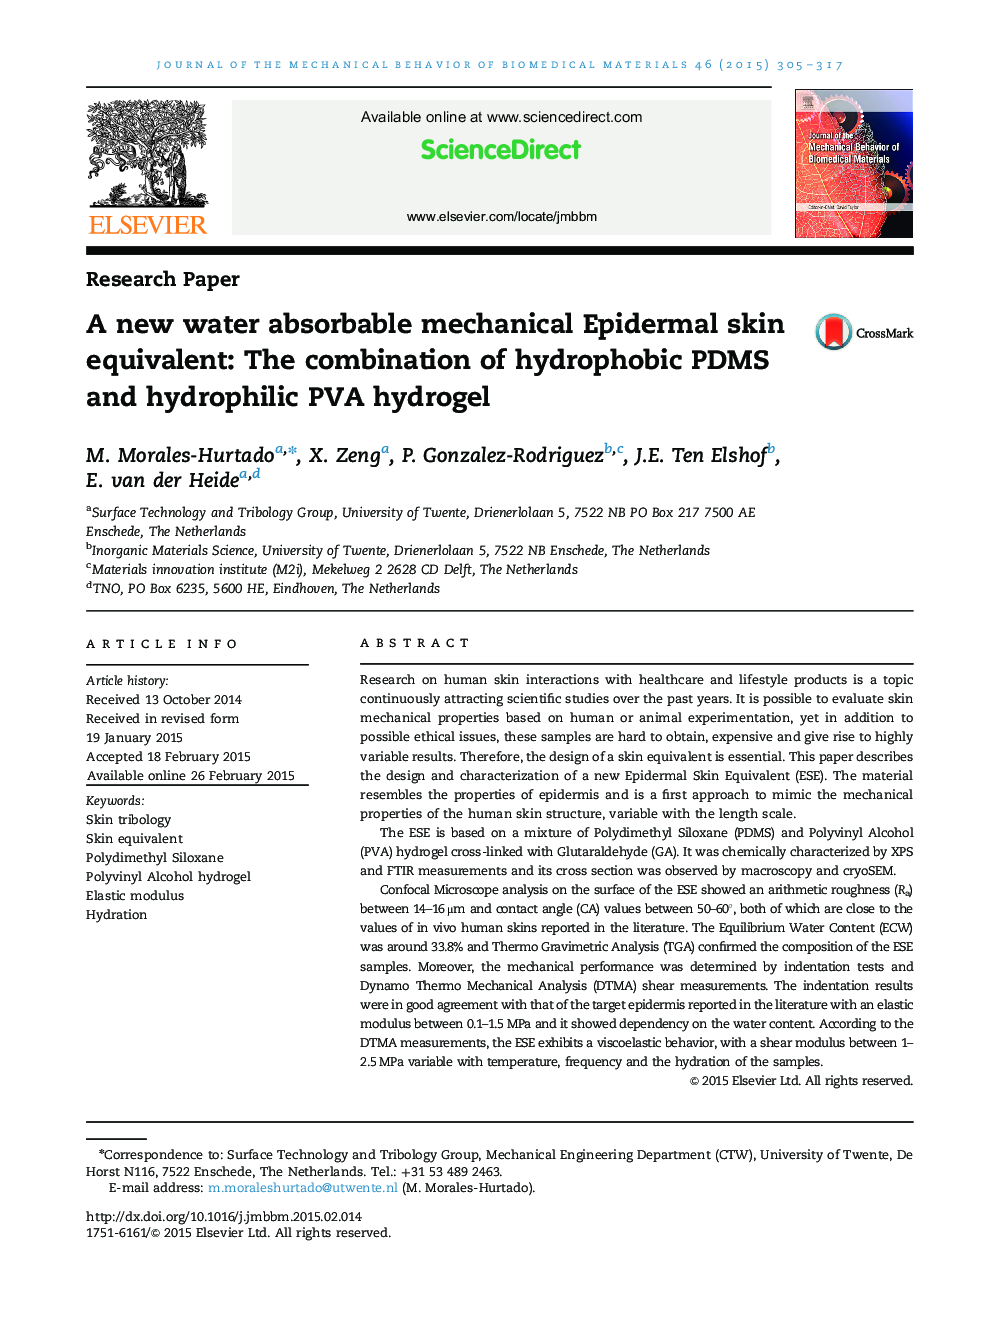 A new water absorbable mechanical Epidermal skin equivalent: The combination of hydrophobic PDMS and hydrophilic PVA hydrogel